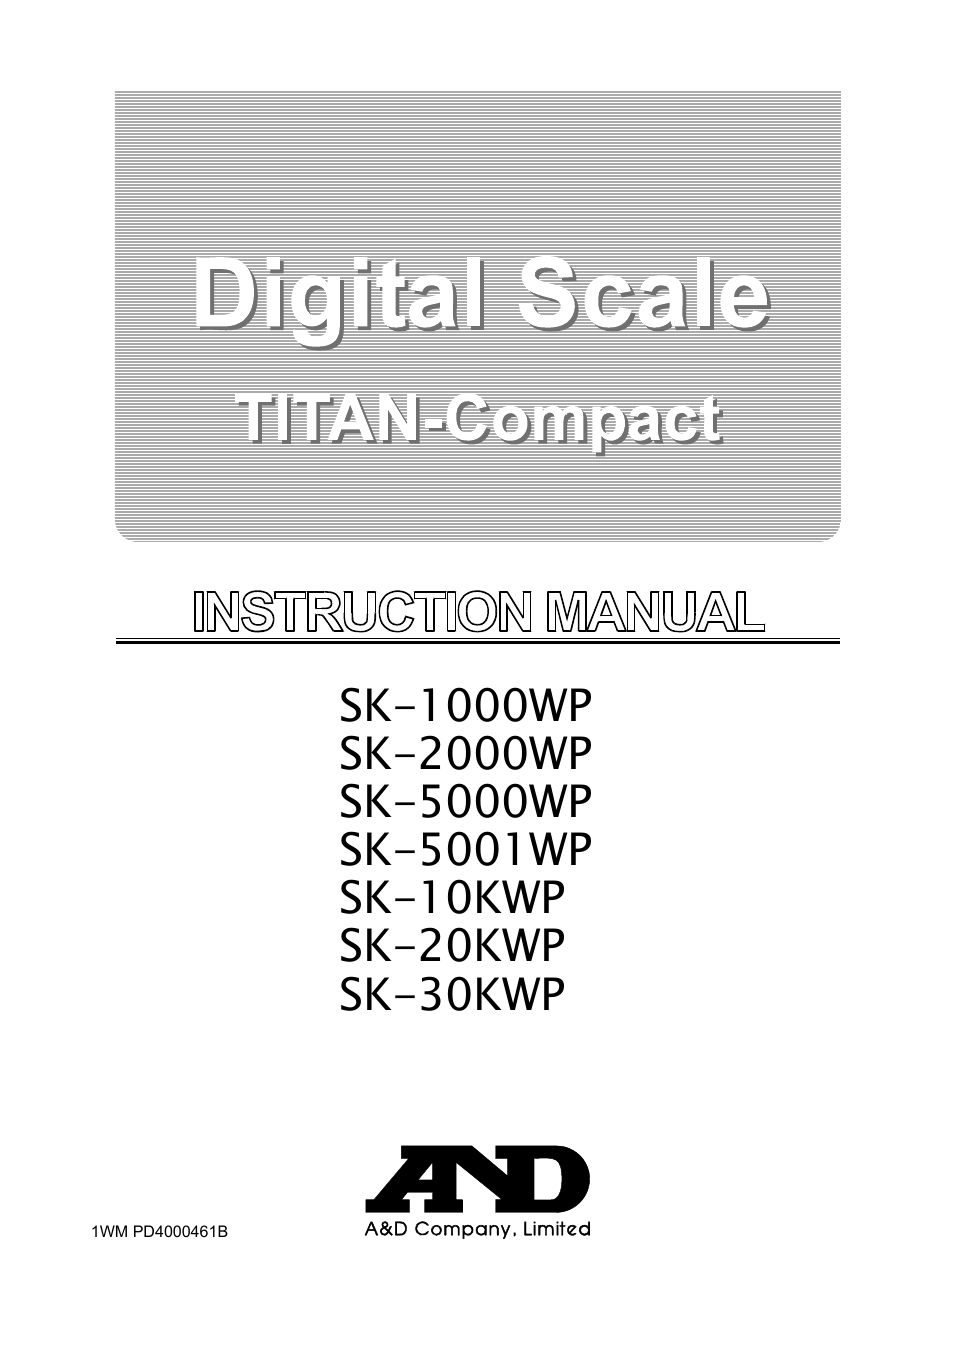 Digital Scale SK-2000WP (Page 1)